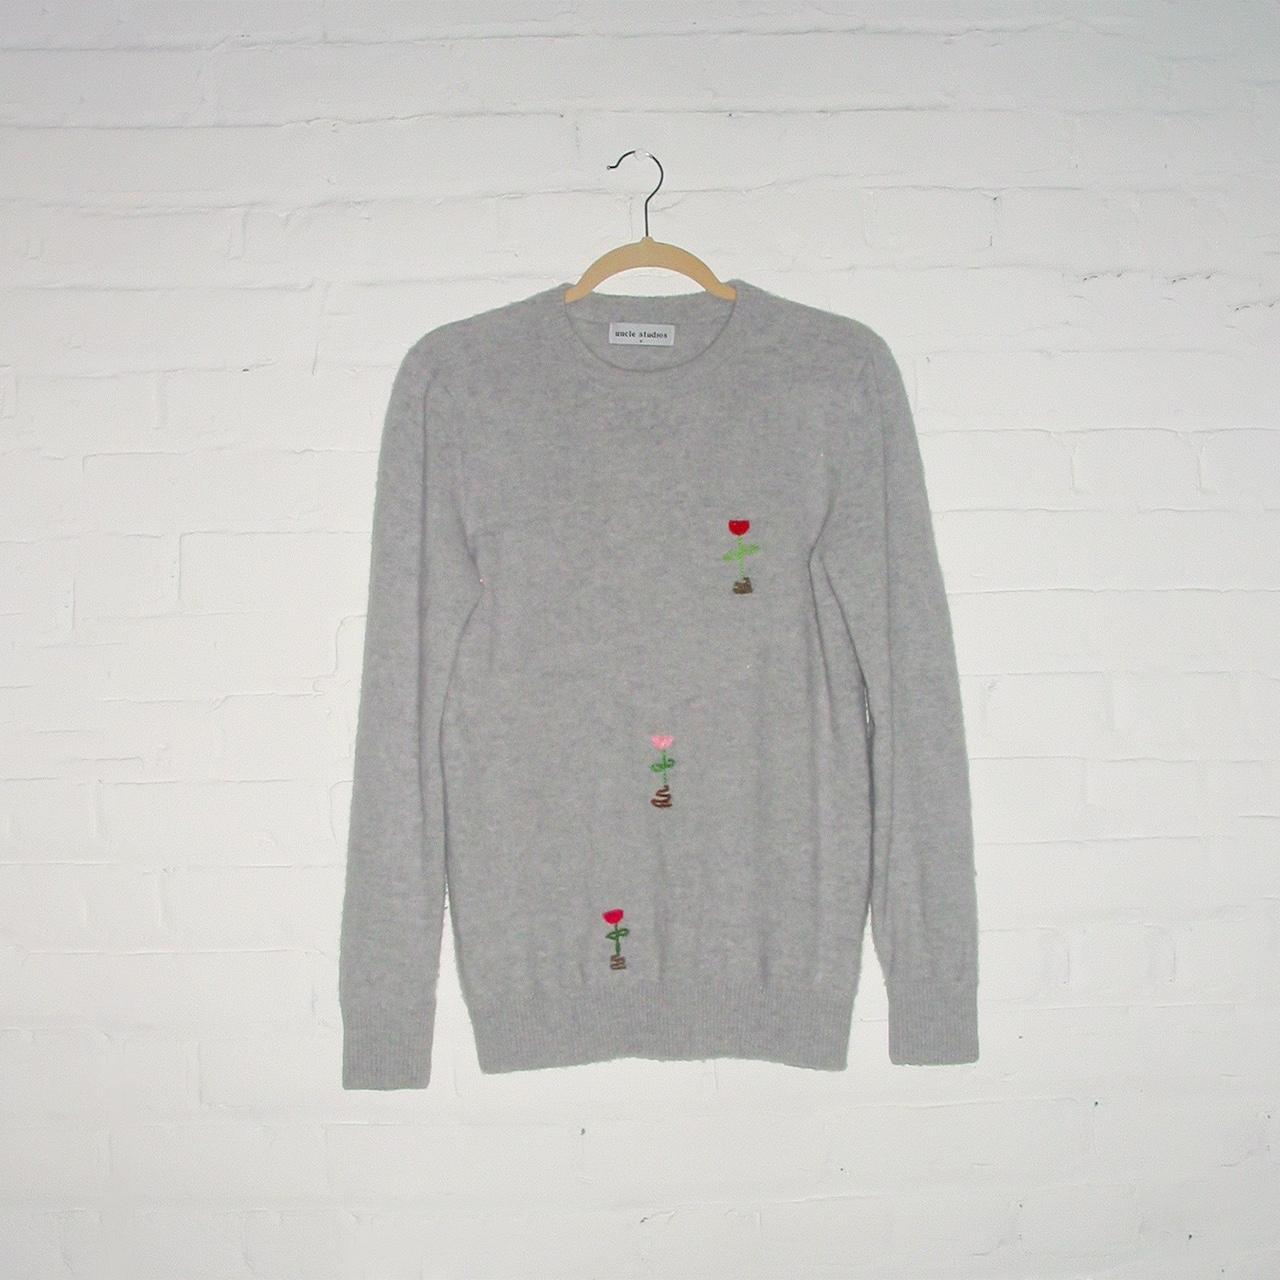 Product Image 1 - The Upcycled Cashmere.

The Cashmere came